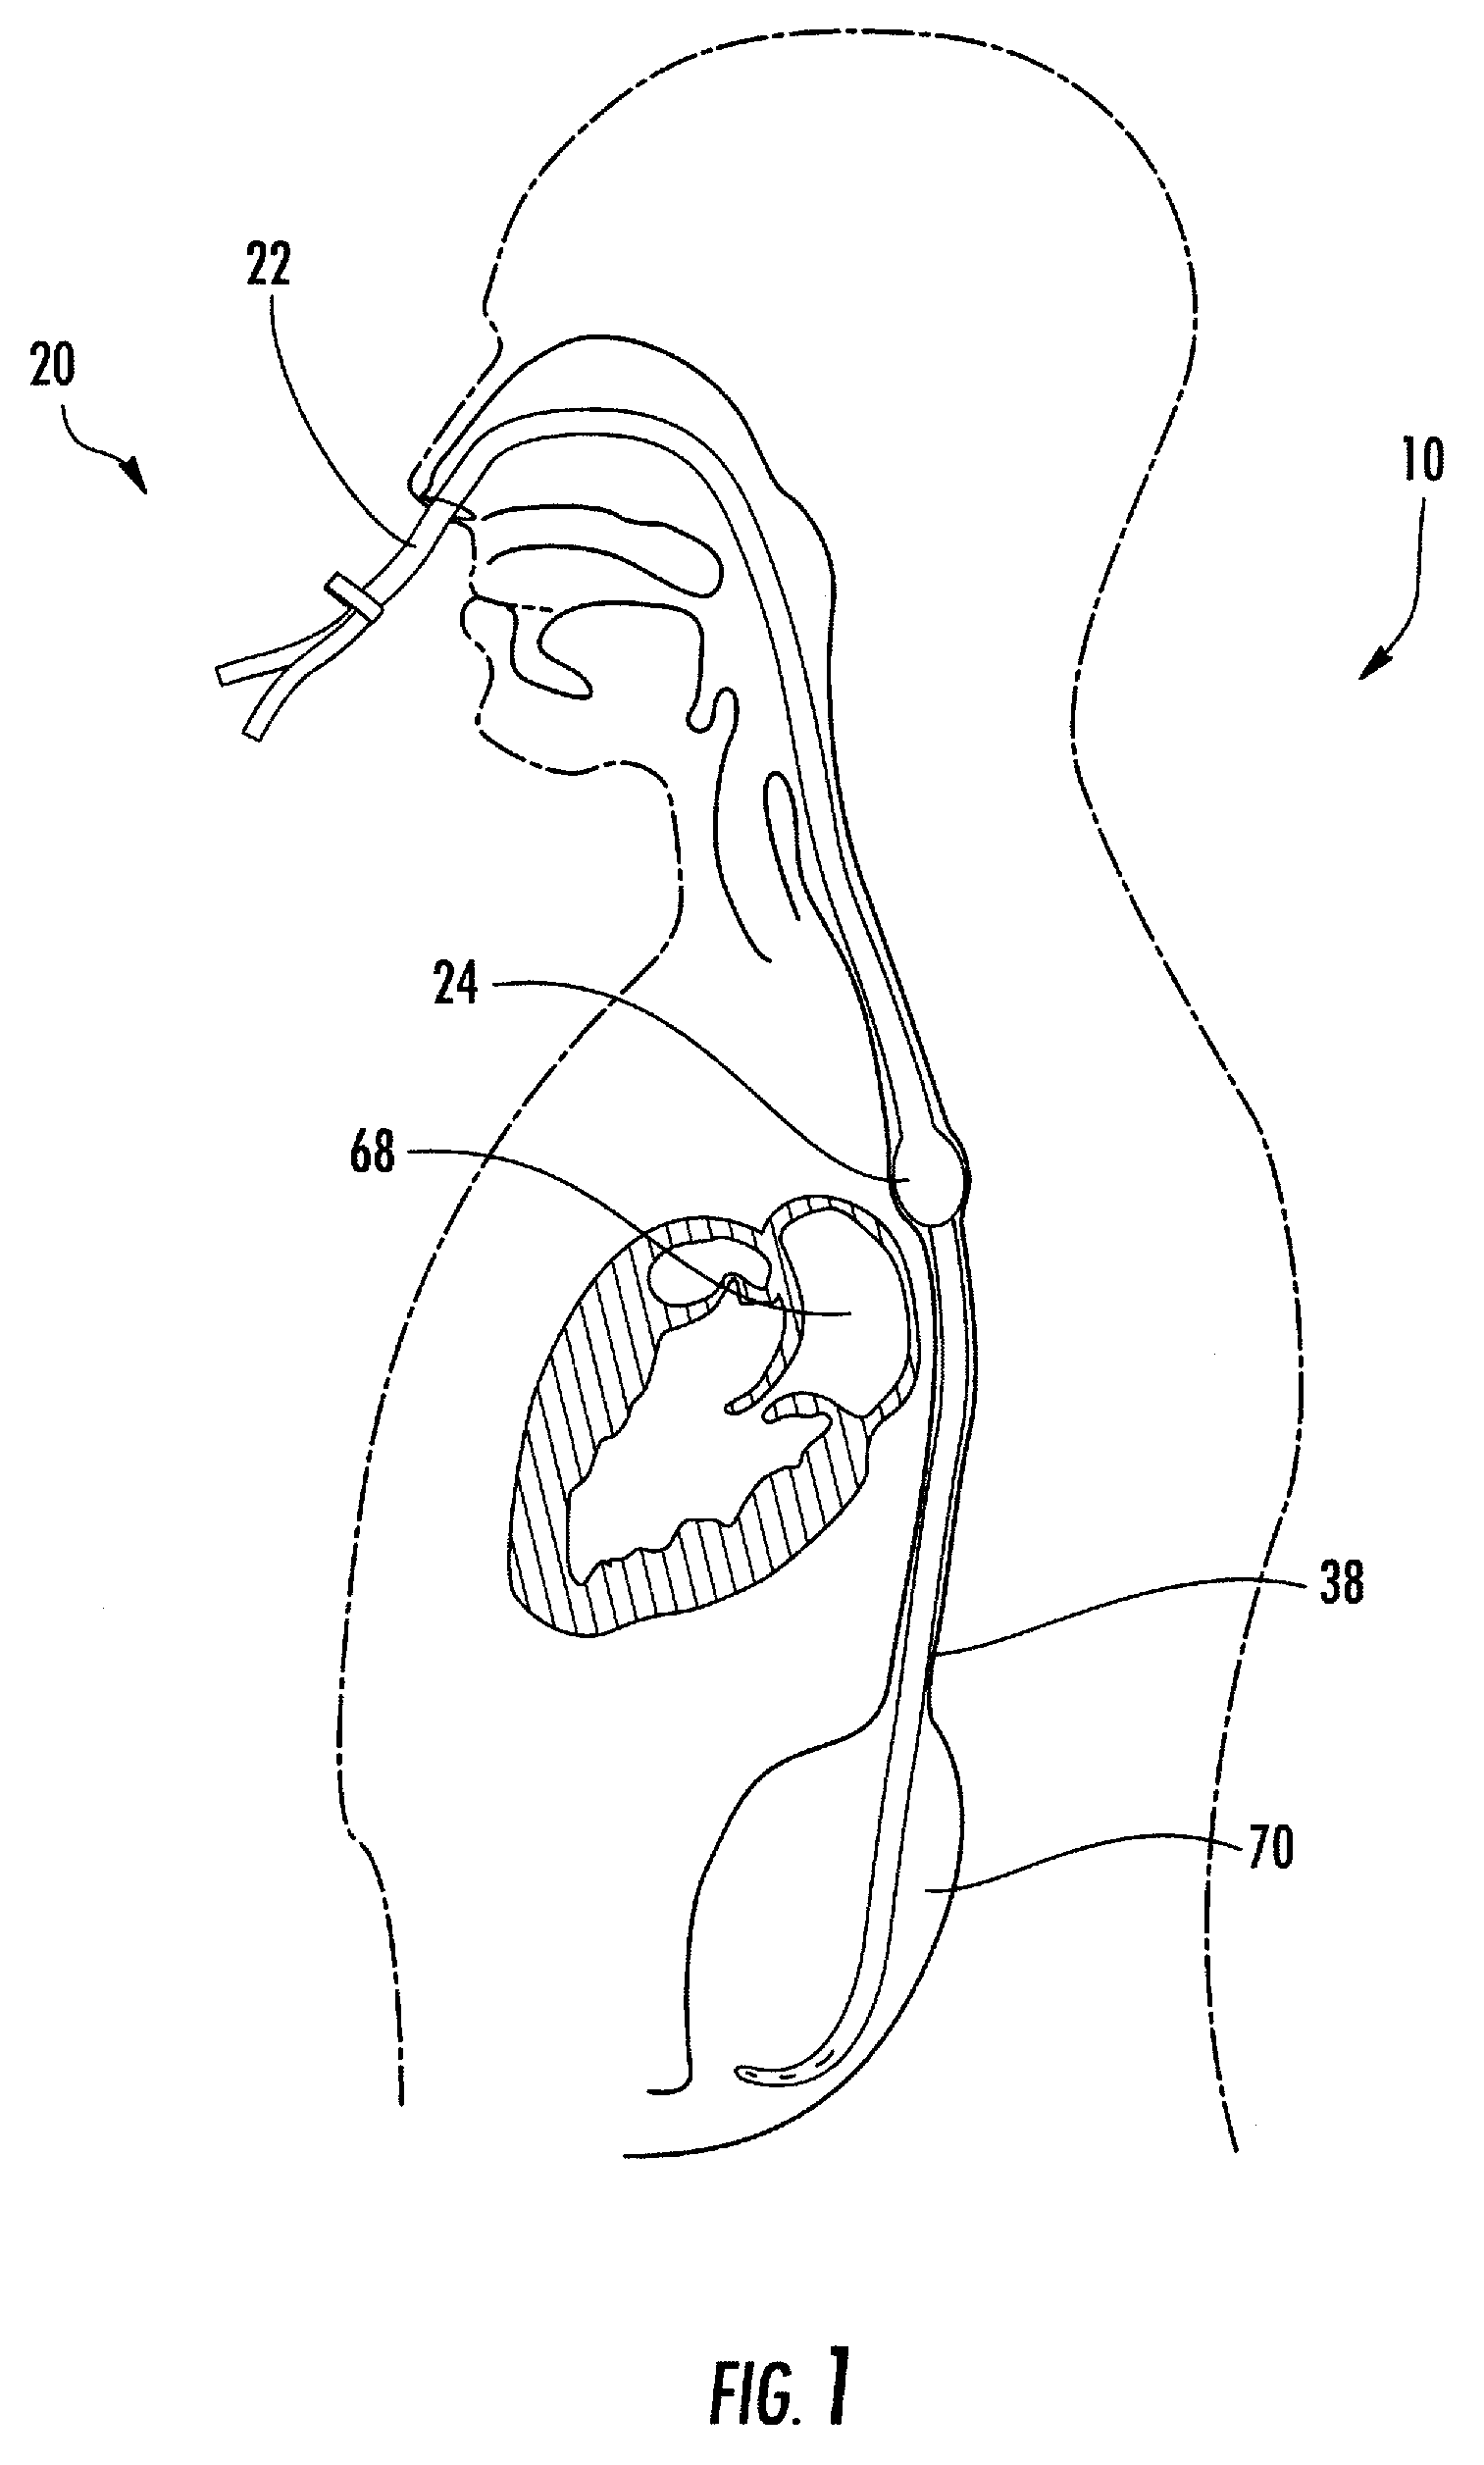 Esophageal cooling system for ablation procedures associated with cardiac arrhythmias